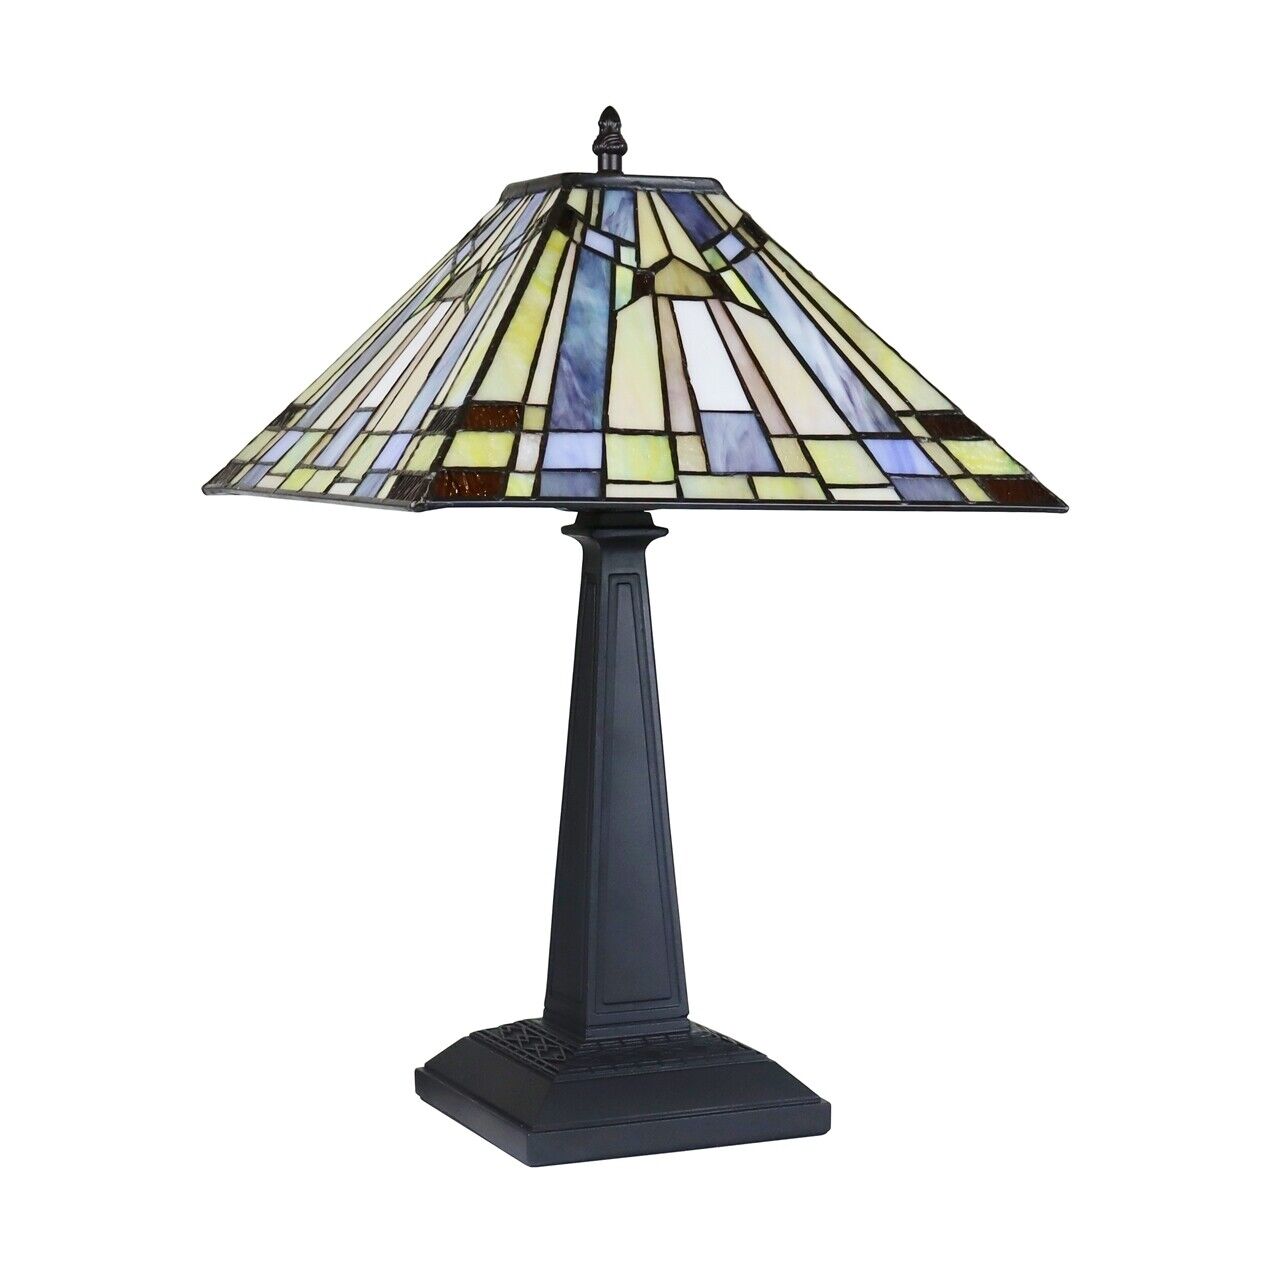 18" 1 light Antique Vintage Style Stained Glass Mission Table Lamp